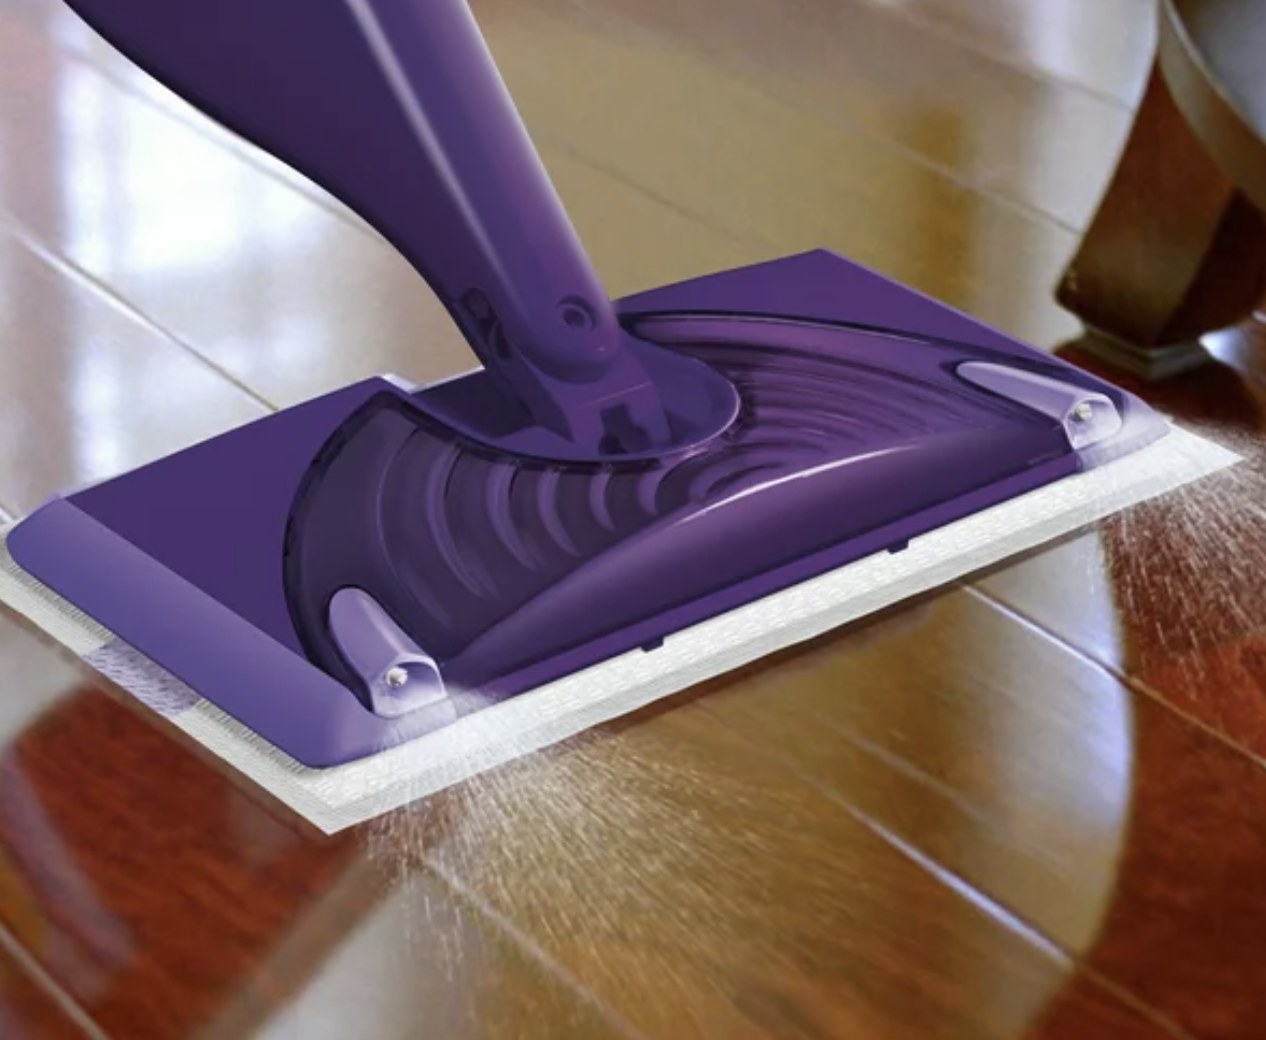 The purple mop sprays out cleaner on the wooden floor